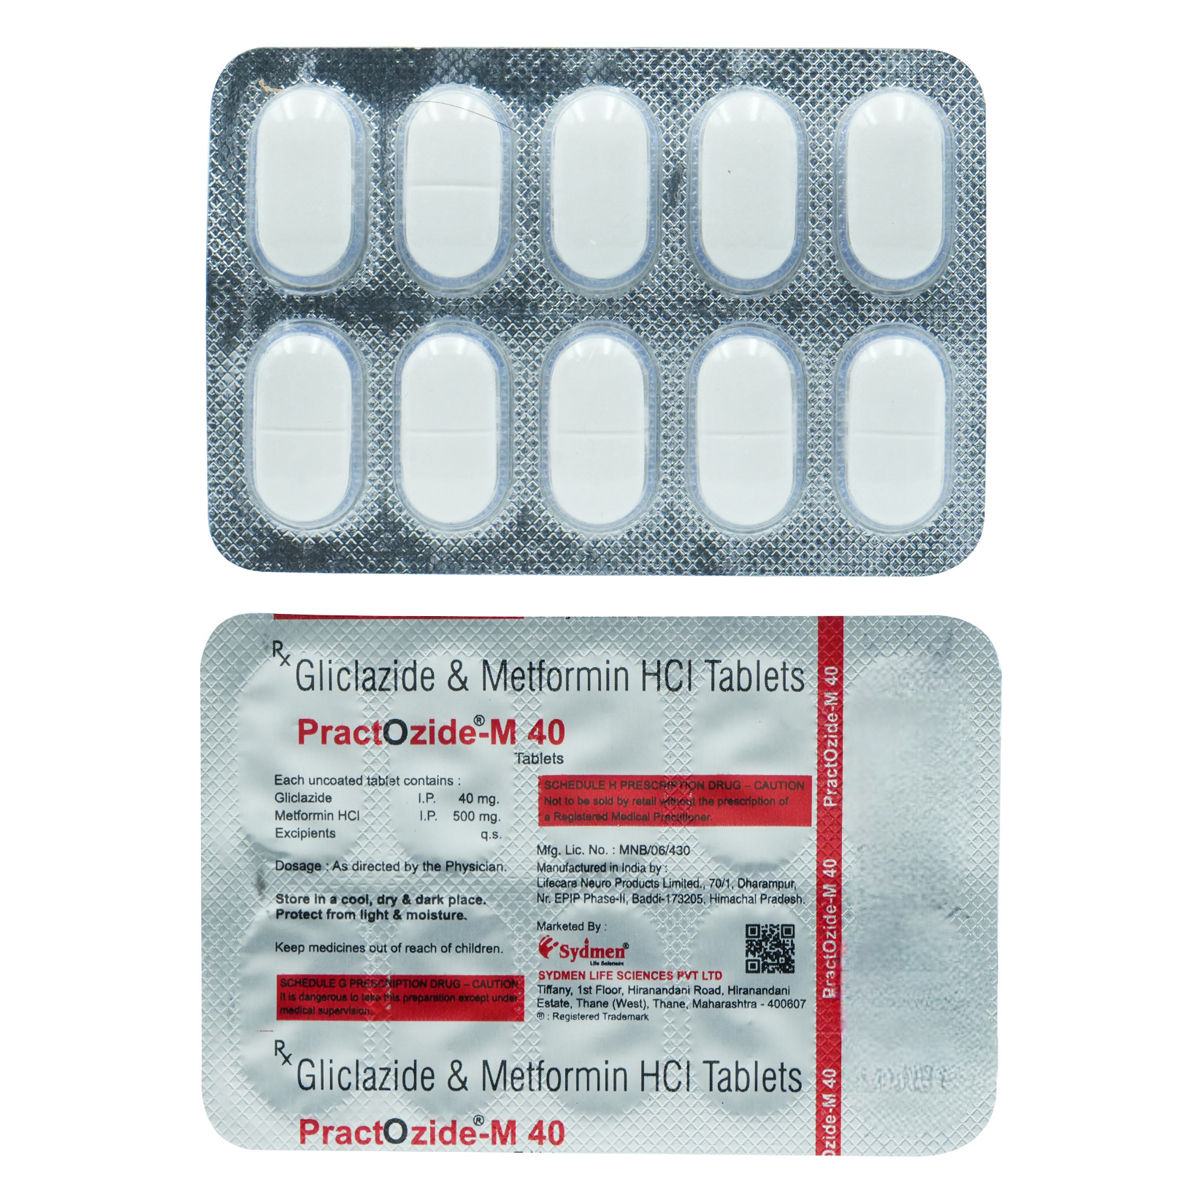 Practozide-M 40 Tablet 10's, Pack of 10 TABLETS